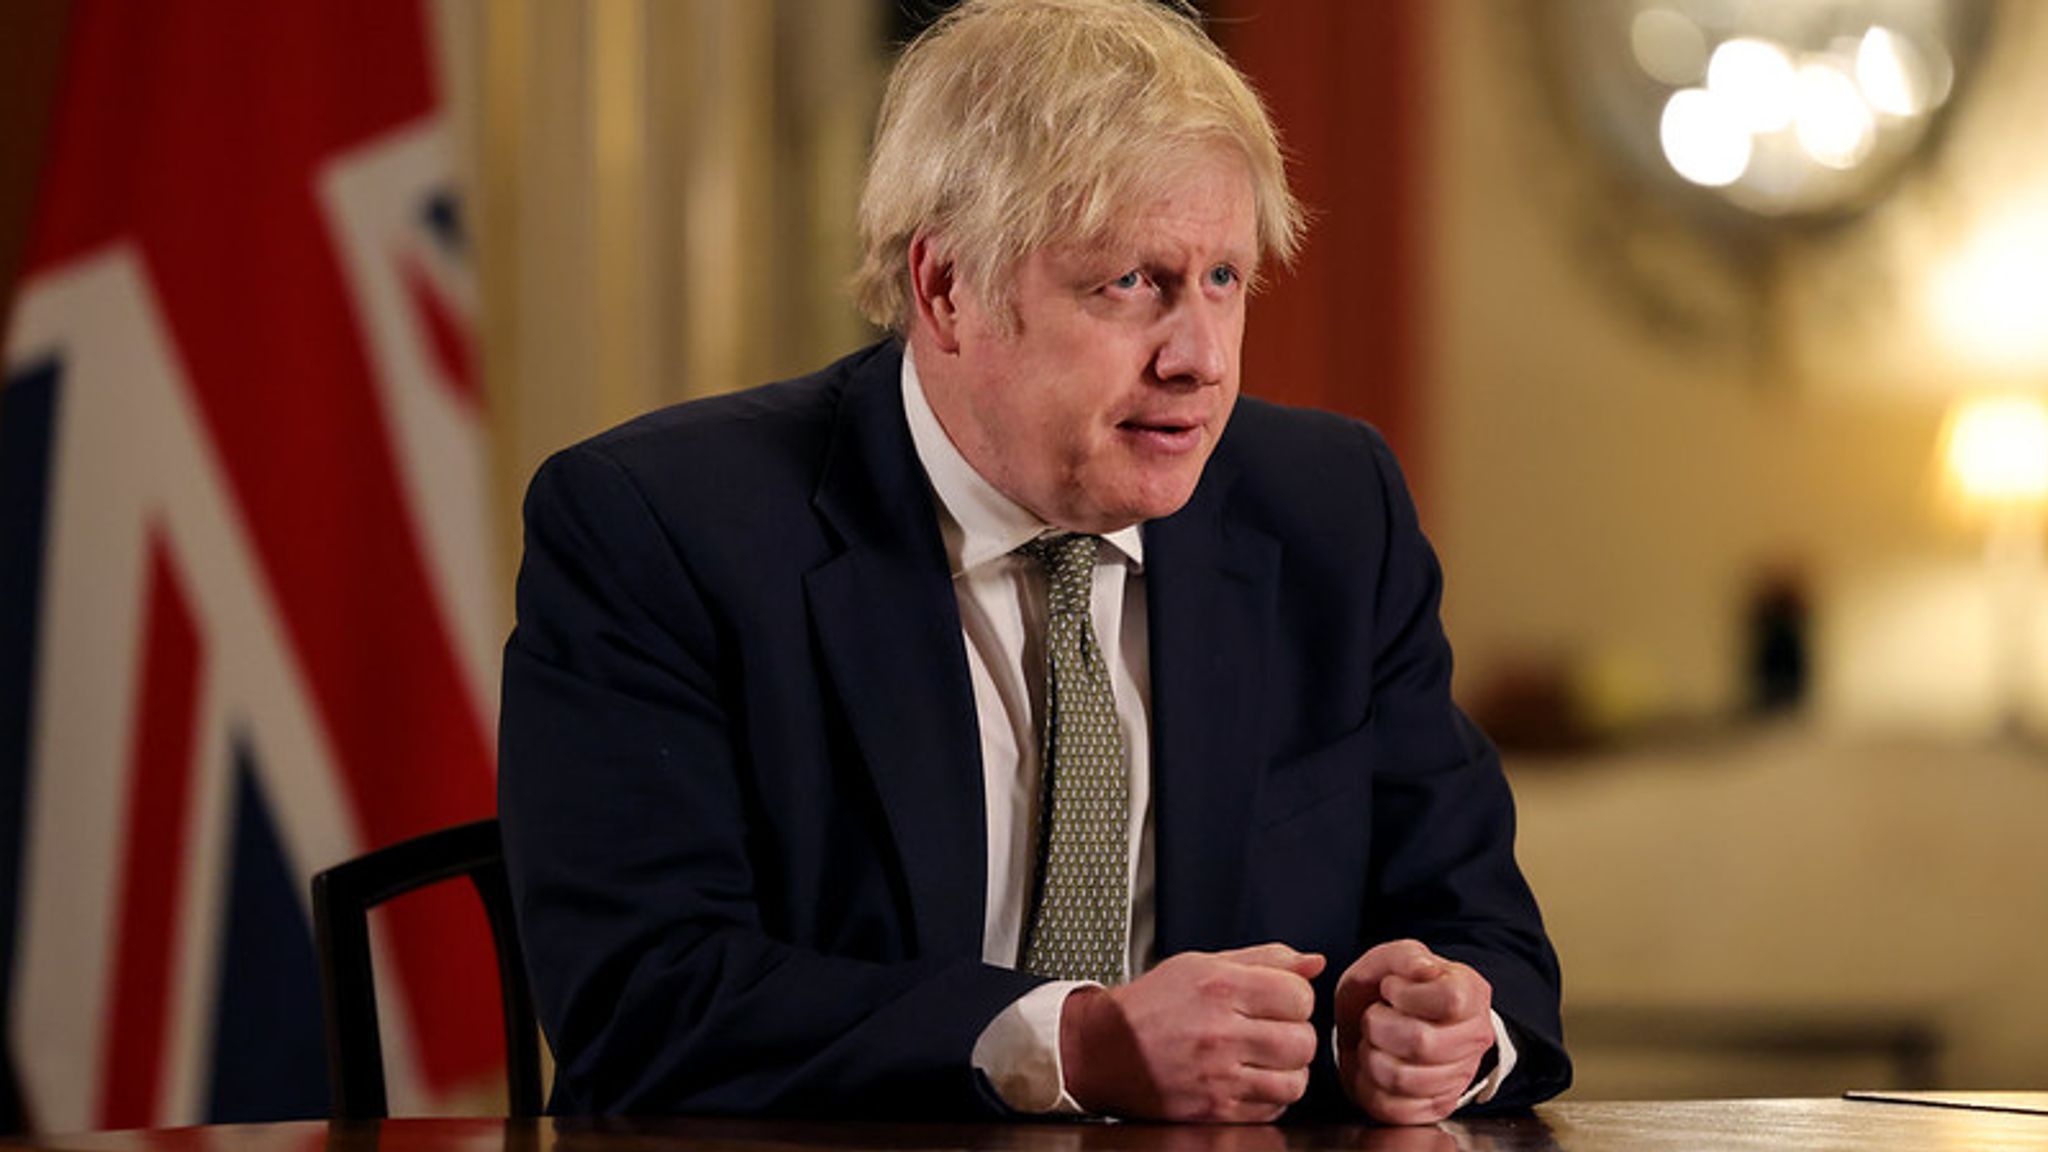 COVID-19: Boris Johnson announces new national lockdown for England which  is expected to last until mid-February | Politics News | Sky News